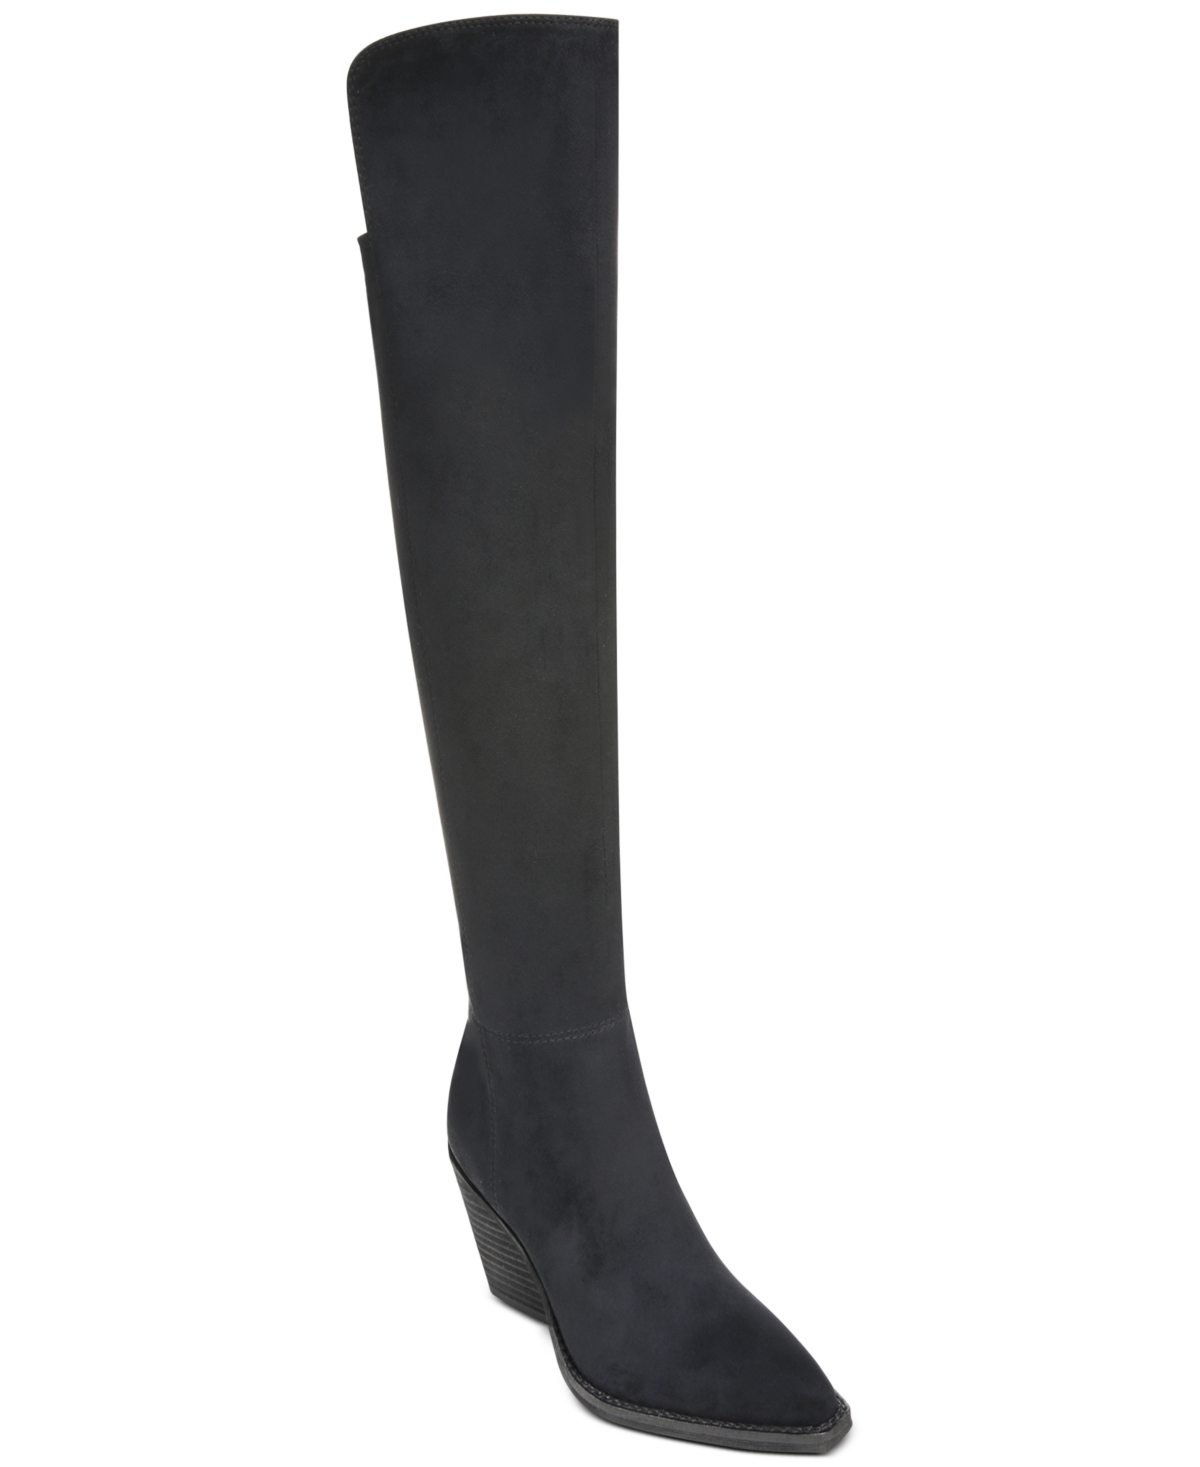 Women's Ronson Over-the-Knee Cowboy Boots - Black Suede